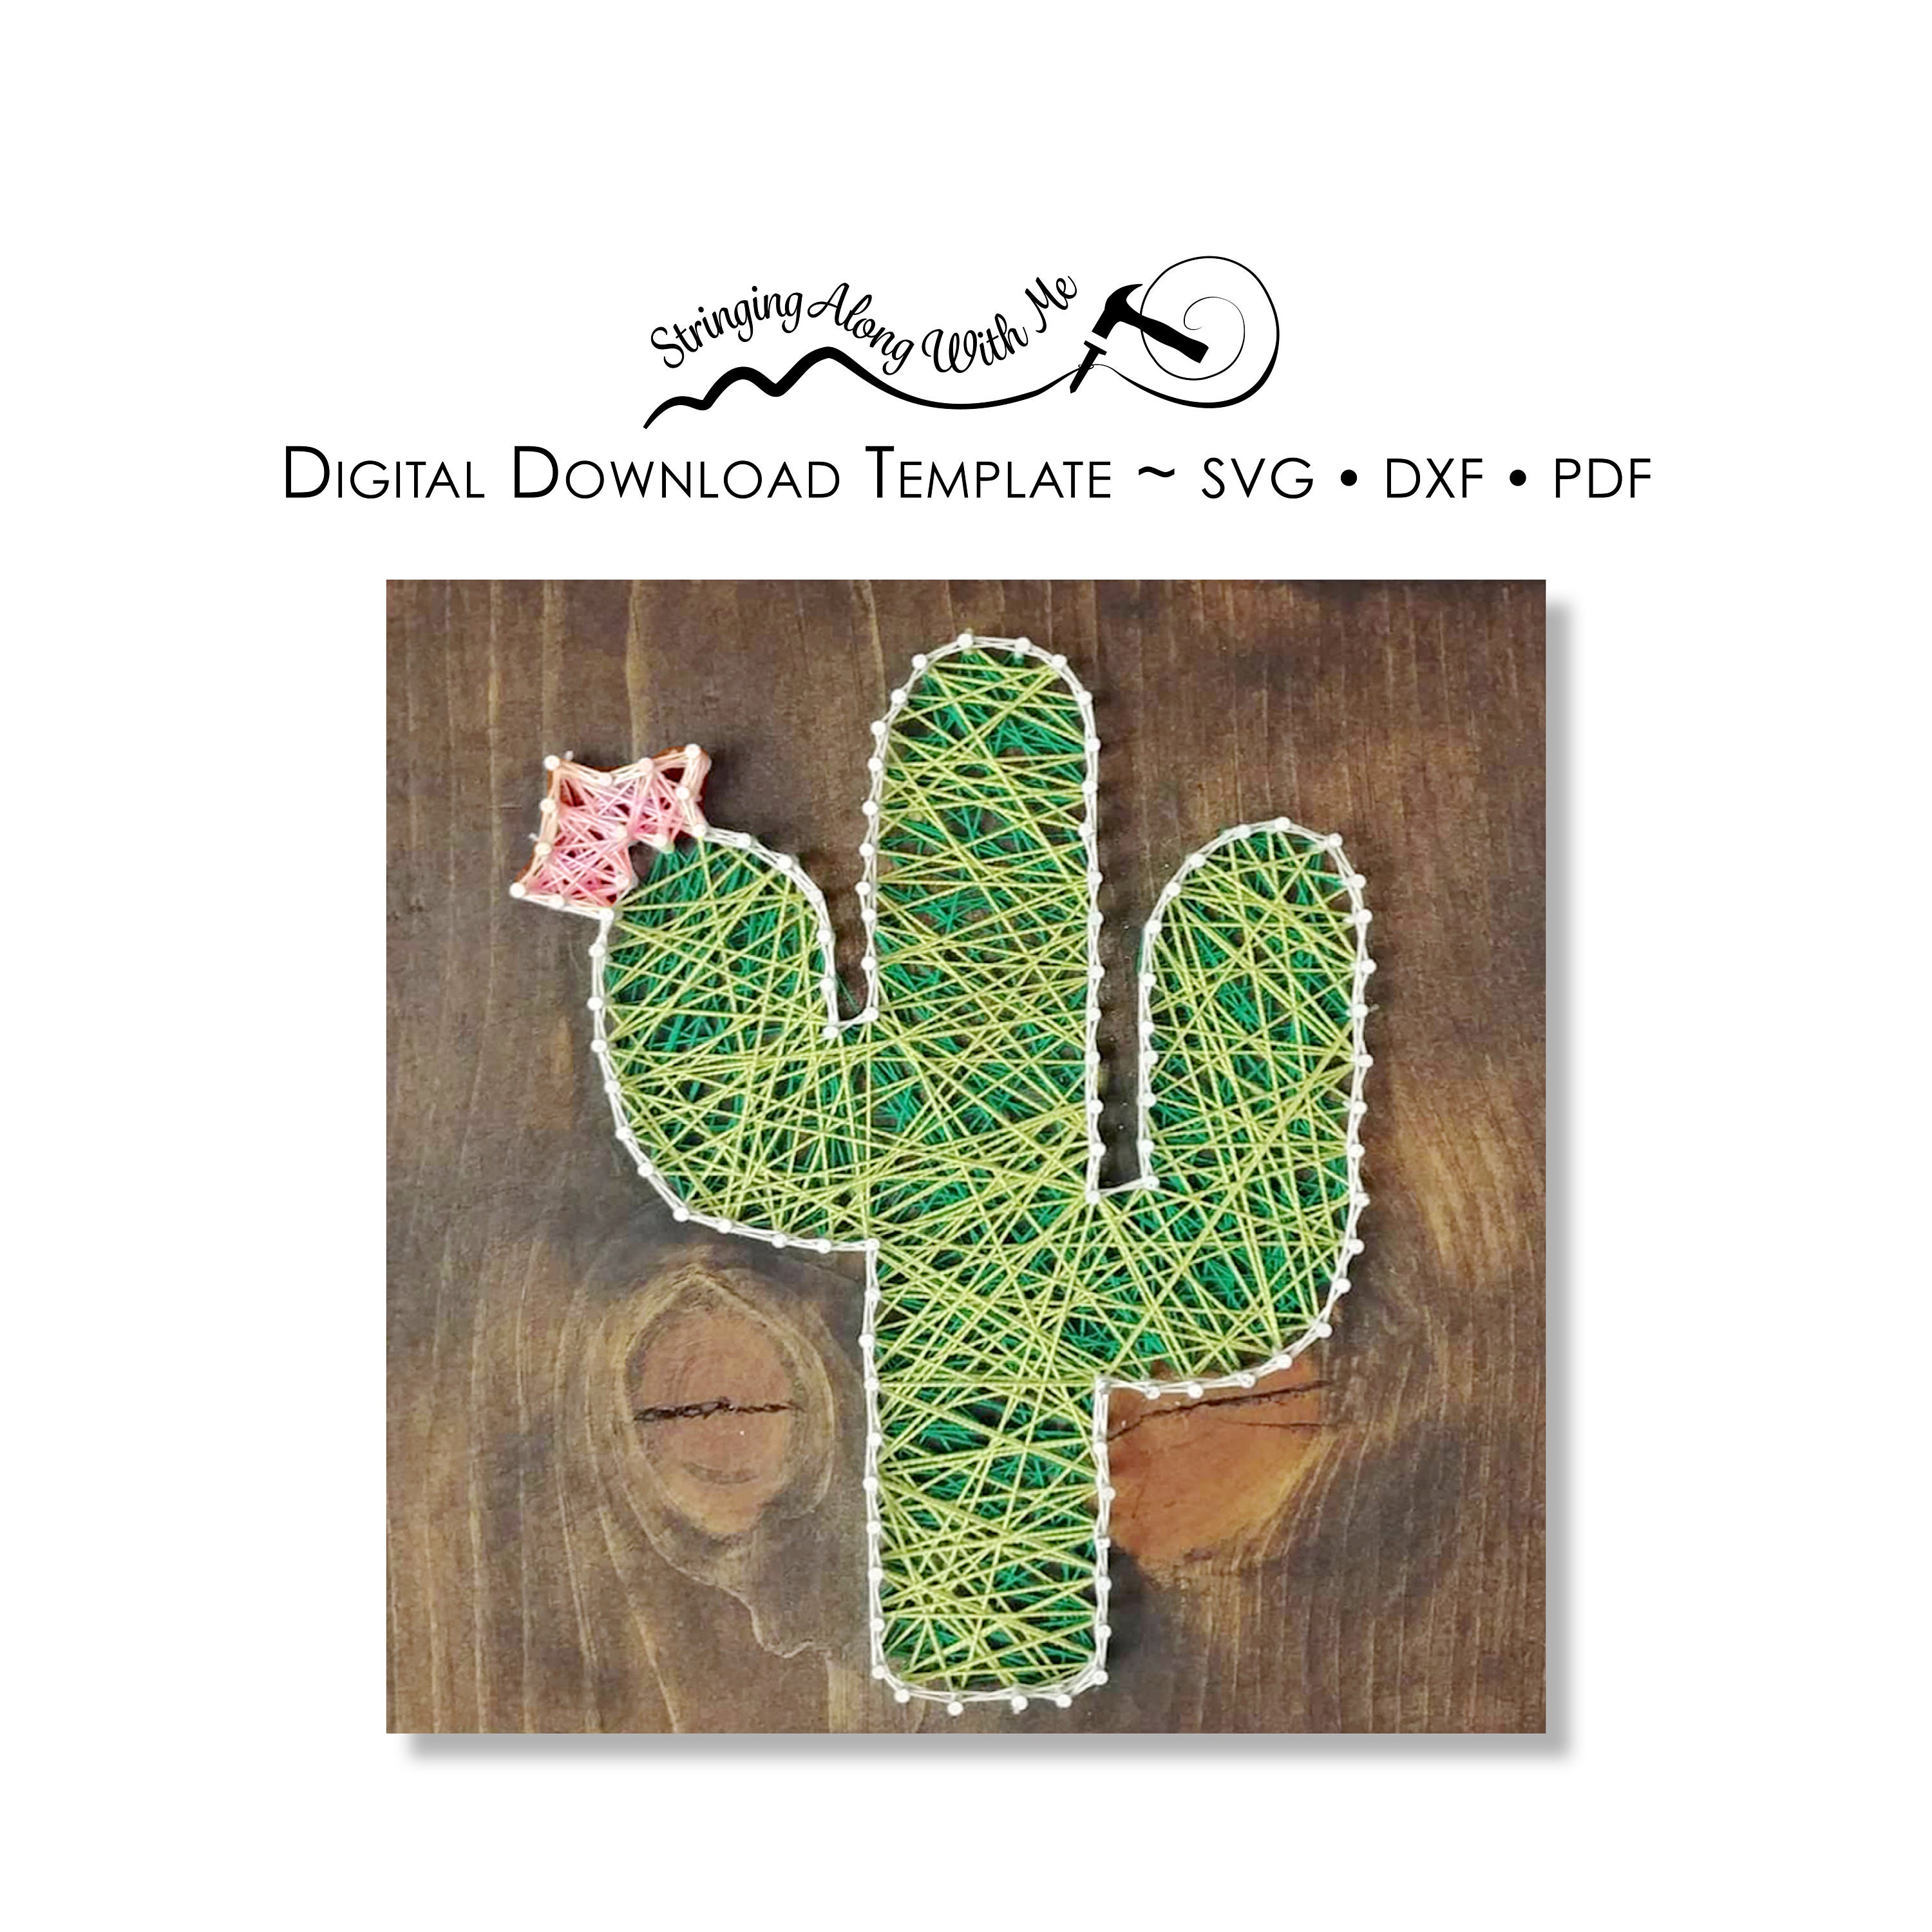 Custom Wood Burning Patterns: Cactus // Easy Pattern Template Design //  Pyrography Art // Instant Download PDF File // Cutting Board Gift 